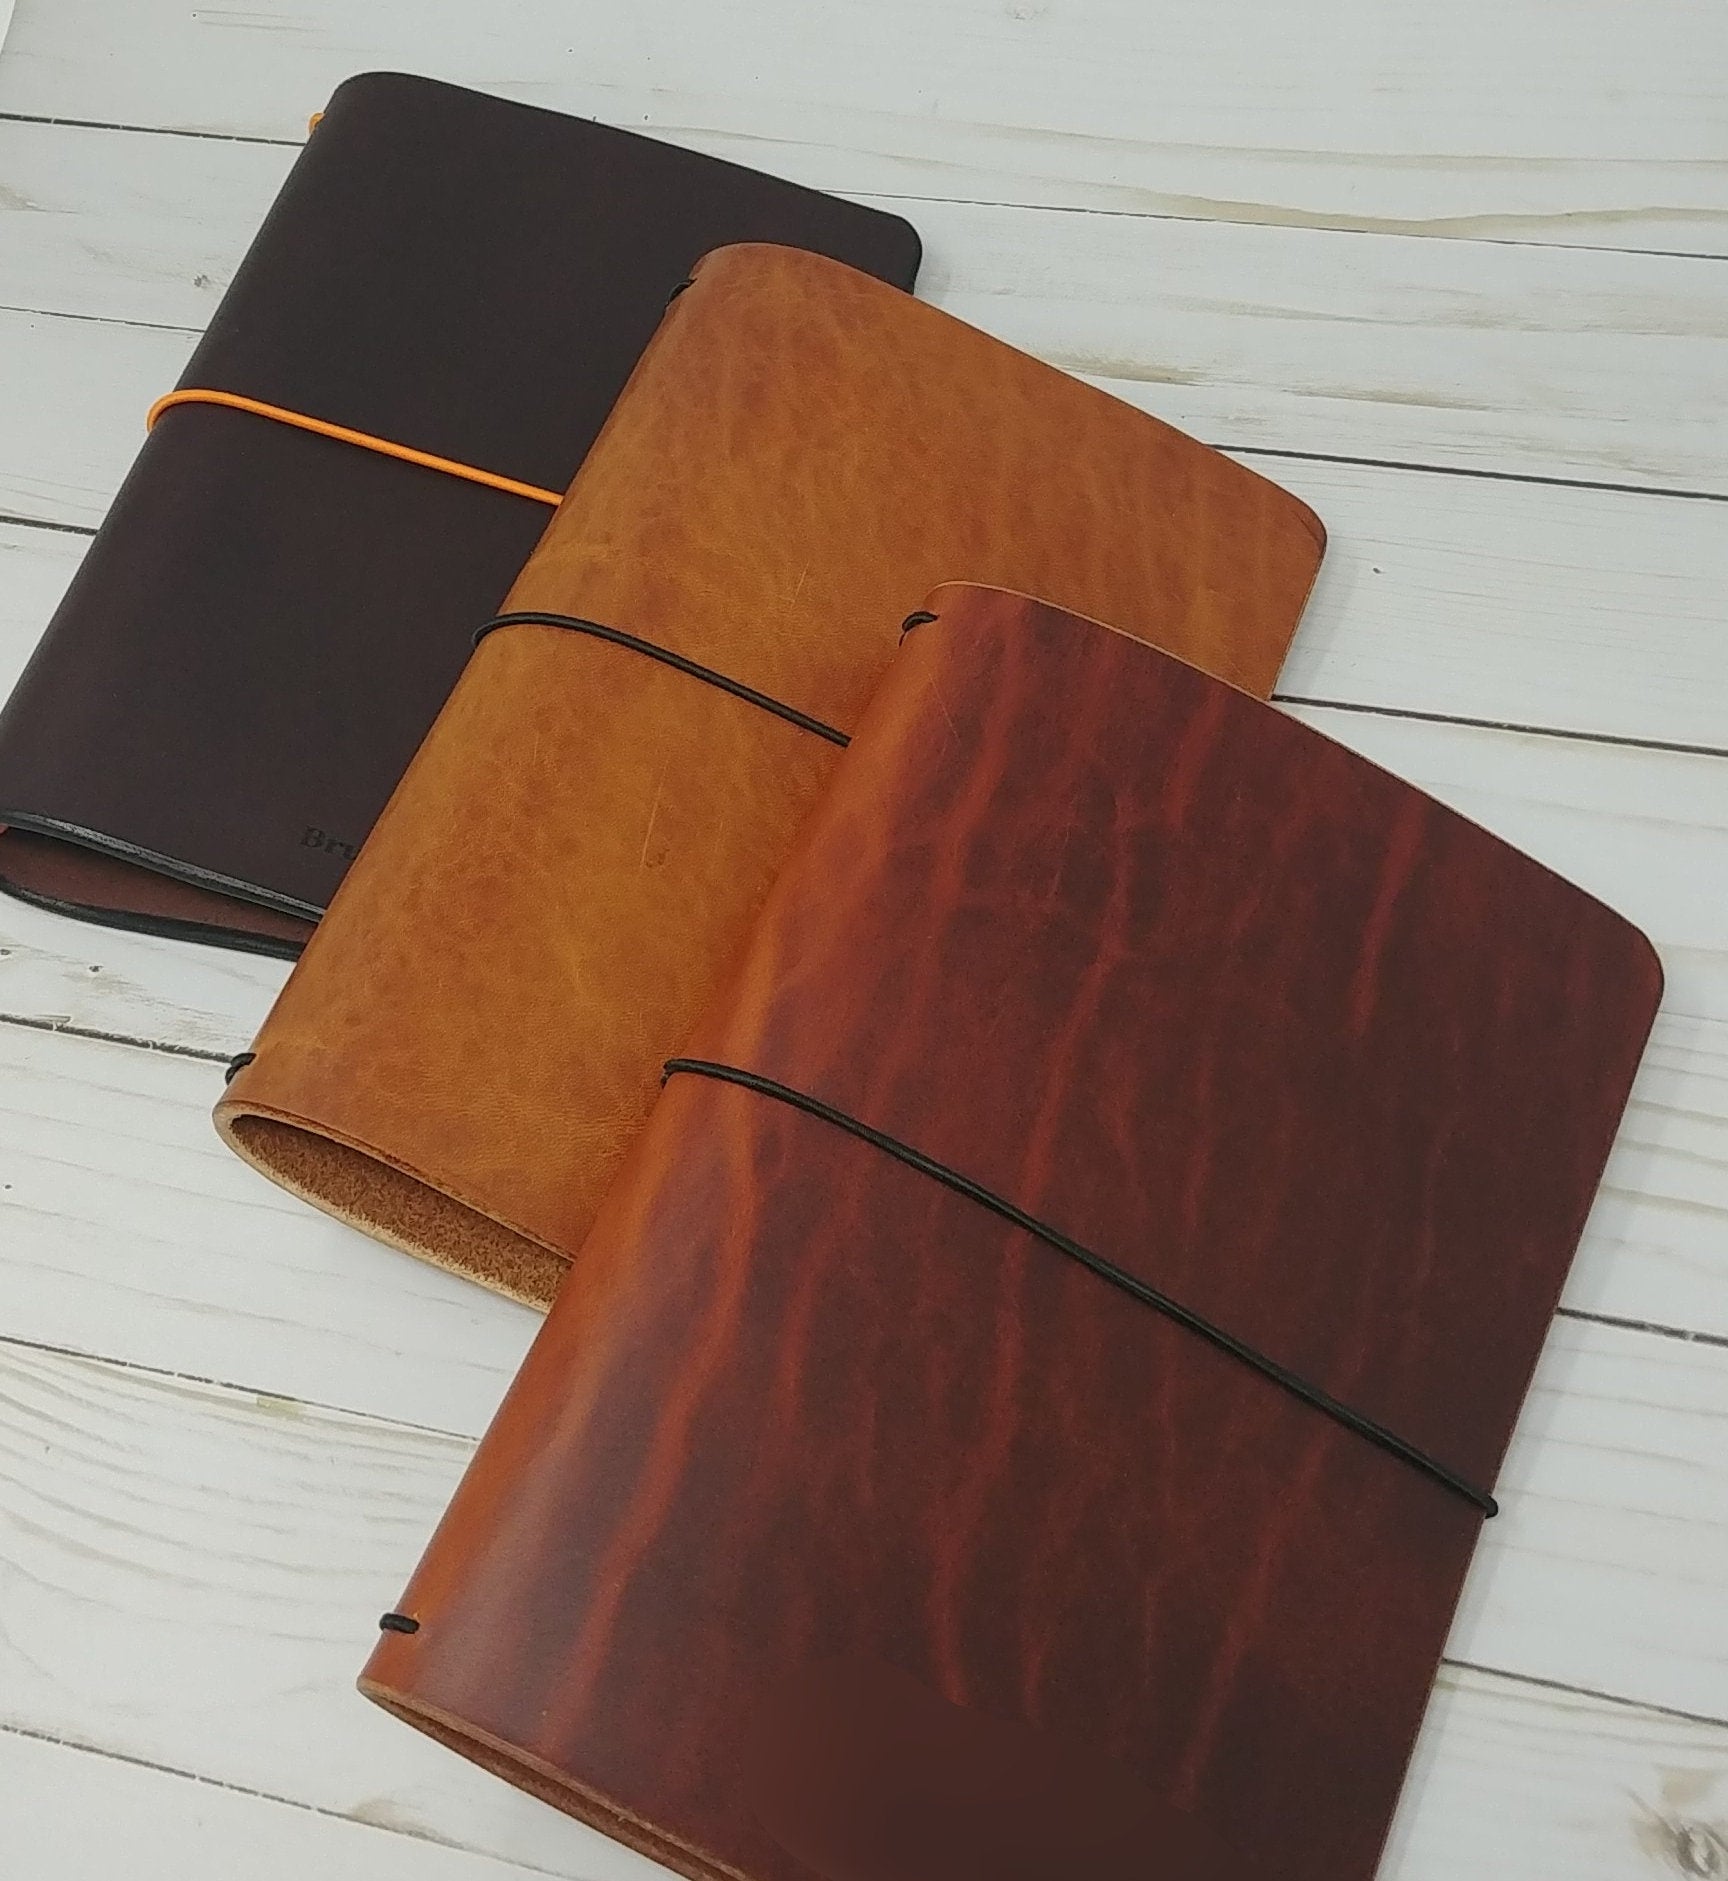 B6 Large *Pick Your Finish* Traveler's Notebook, 8.25" x 12" (open flat) Full-grain Leather, sized for Field Notes Note Books (NOT included)